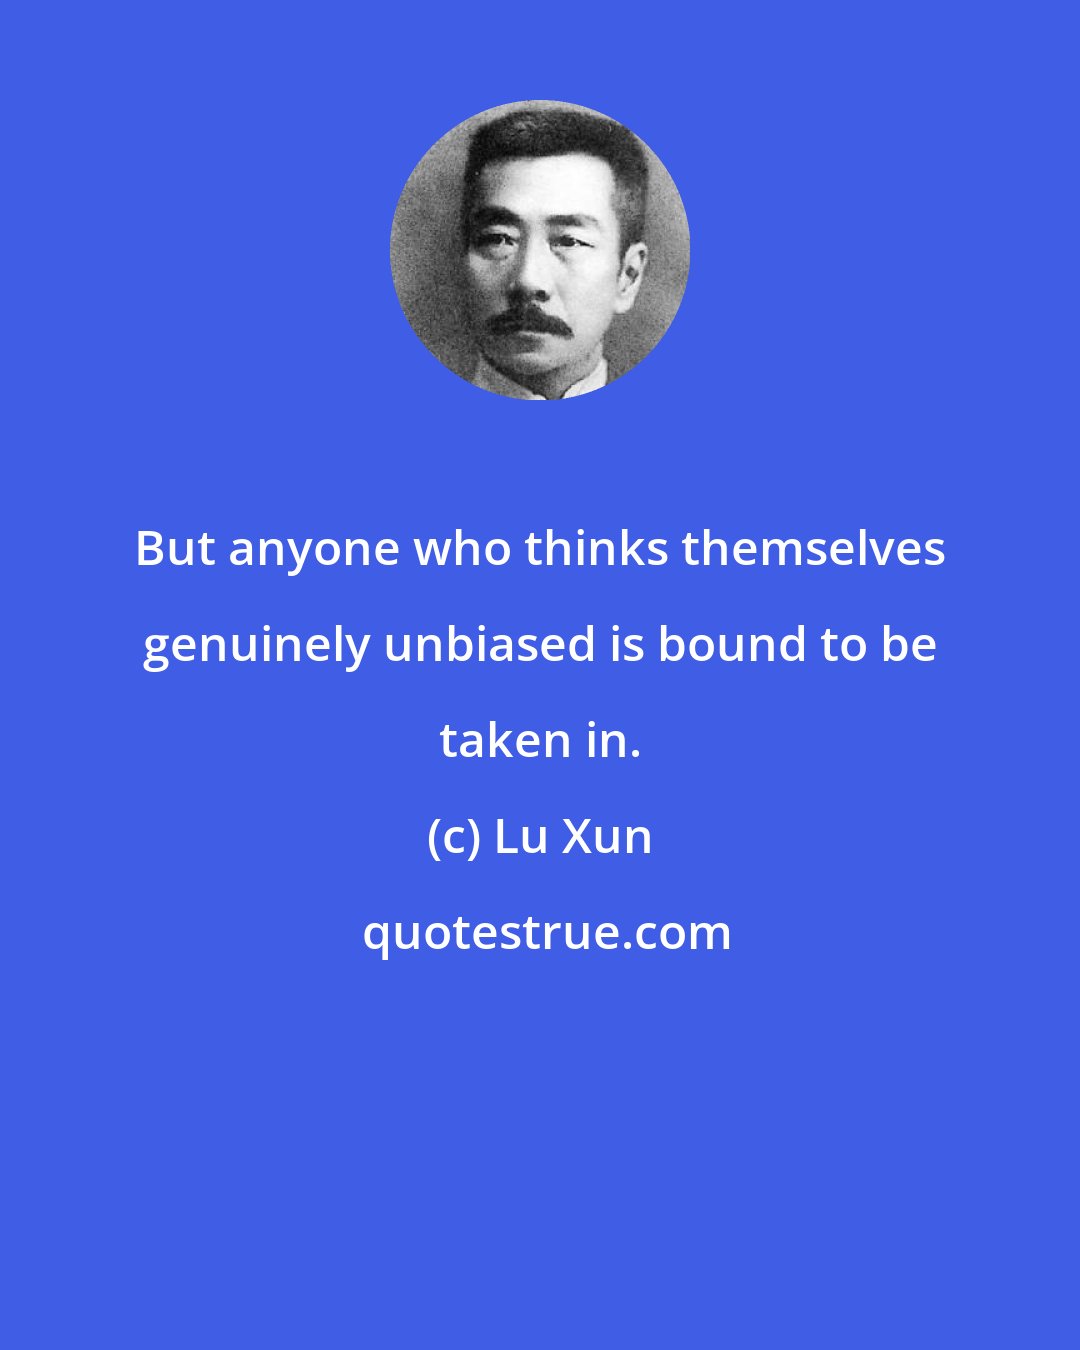 Lu Xun: But anyone who thinks themselves genuinely unbiased is bound to be taken in.